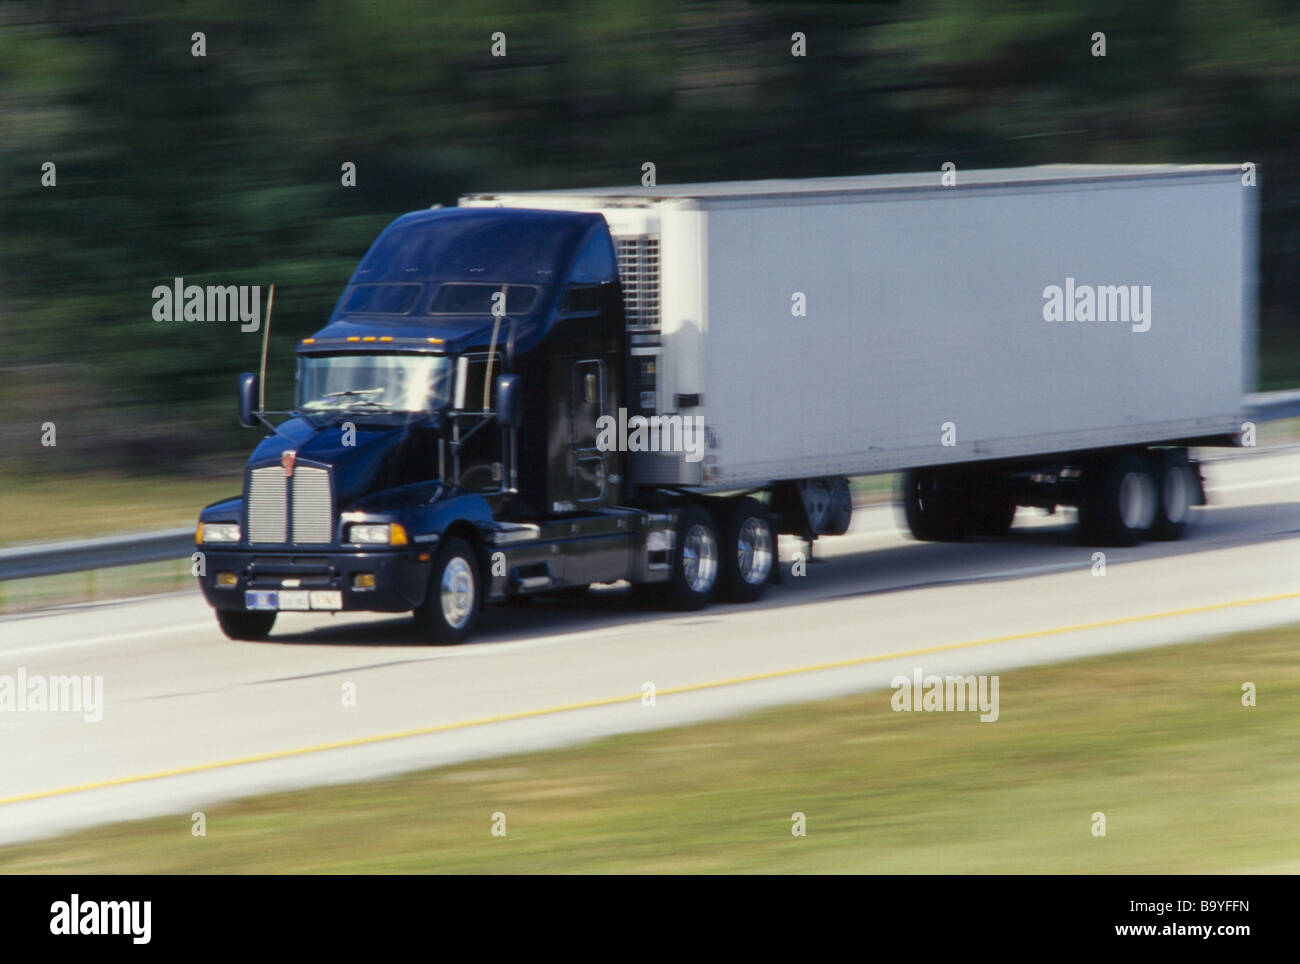 Semi Truck type vechiles, on road in motion Stock Photo